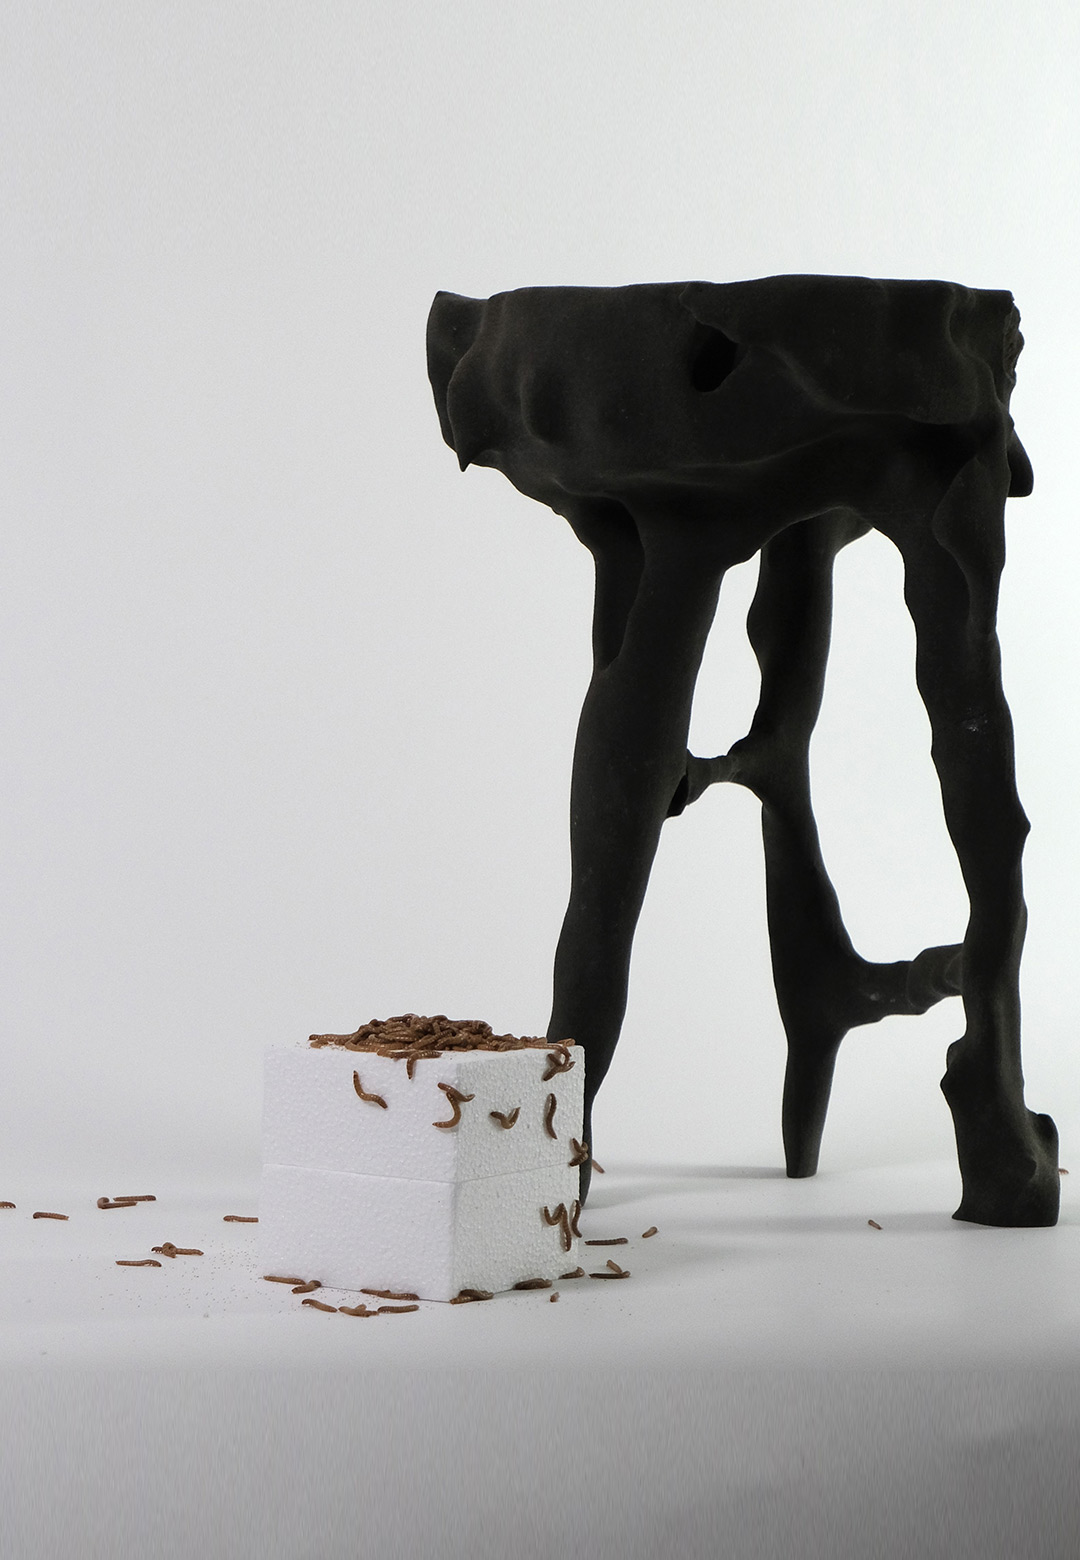 Polystyrene-eating mealworms collaborate on William Eliot’s 'Digested Objects' stool